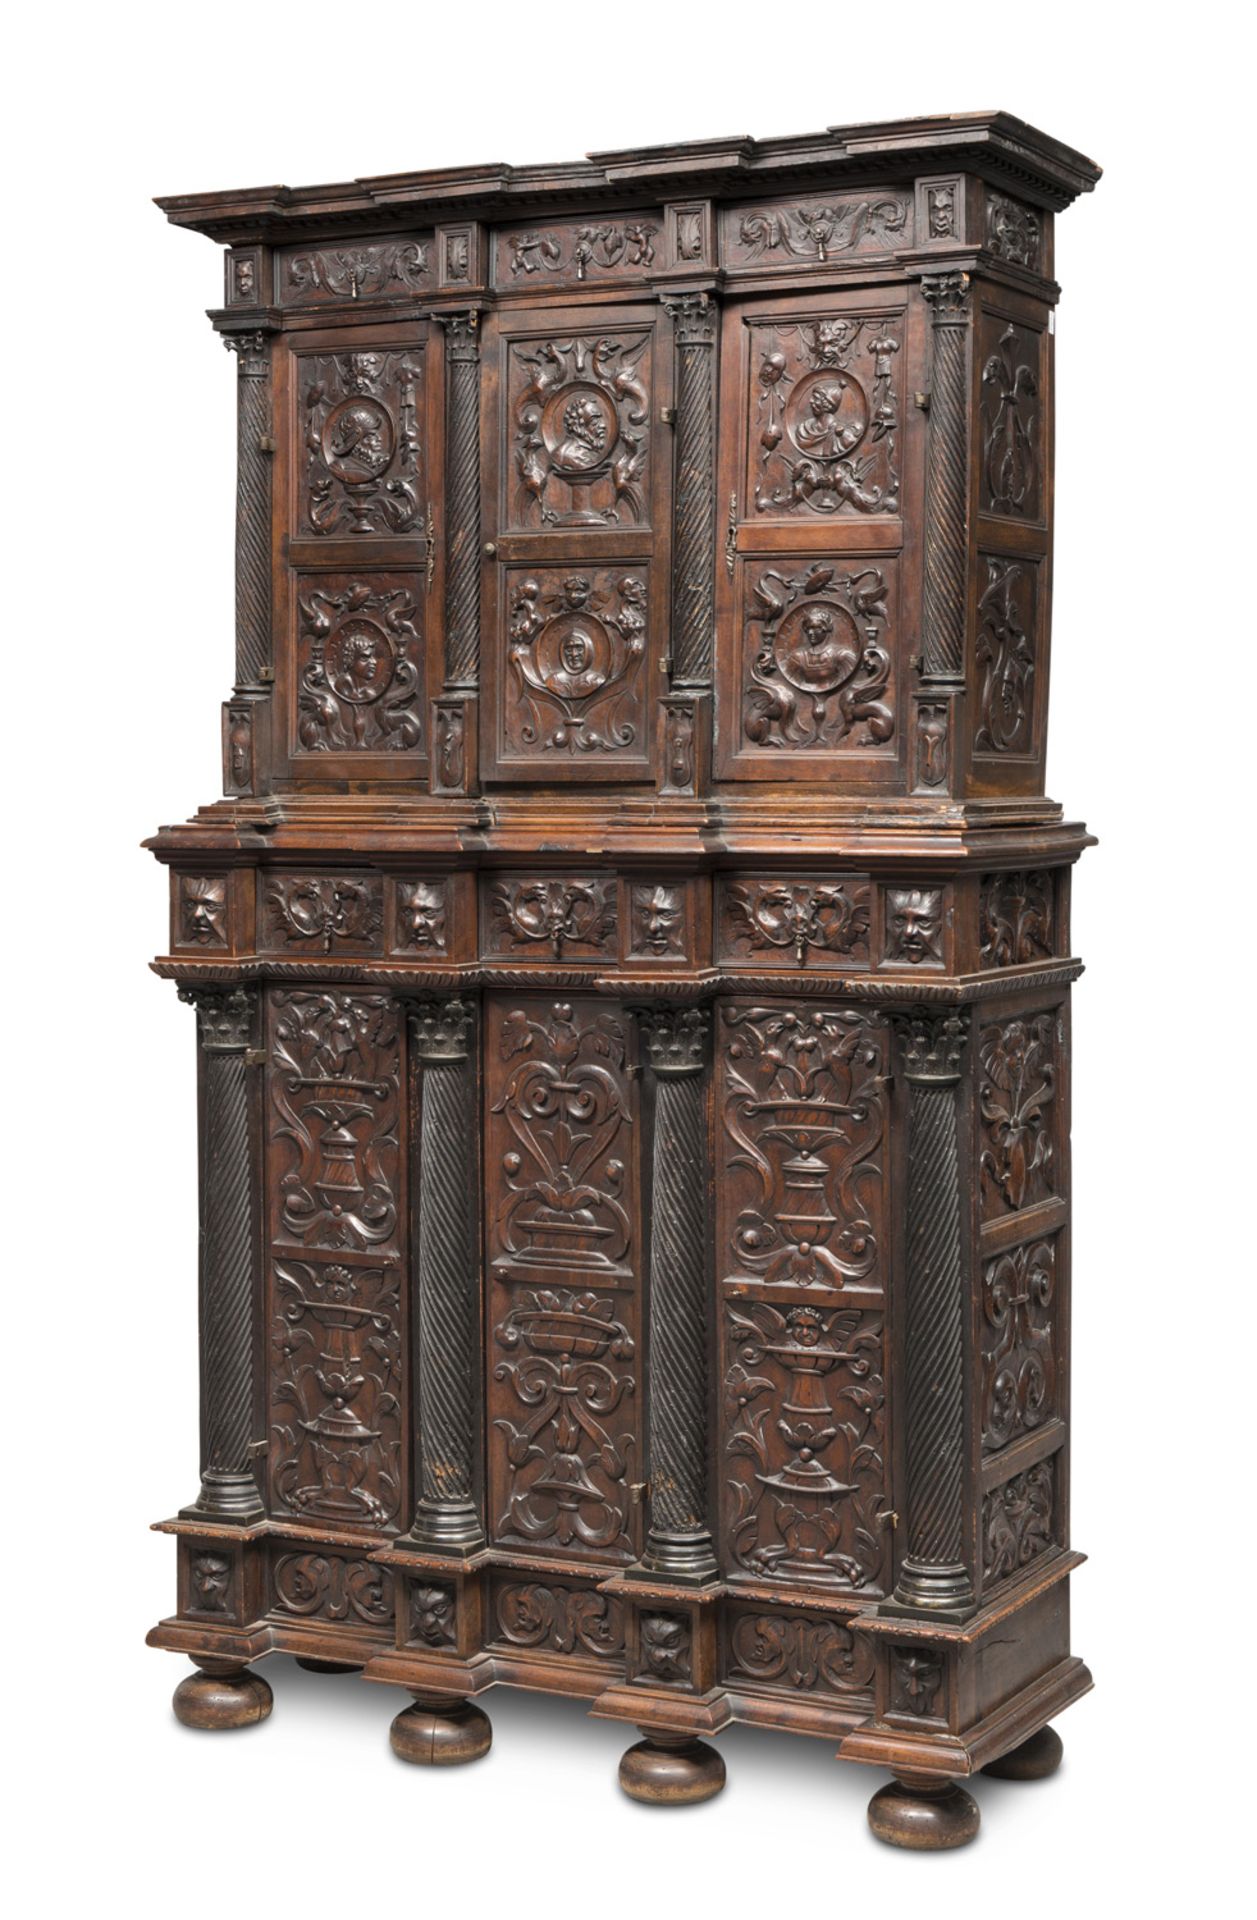 TWO-CORPS SIDEBOARD IN WALNUT, 19TH CENTURY of Renaissance style, sculpted to motifs of grotesque,